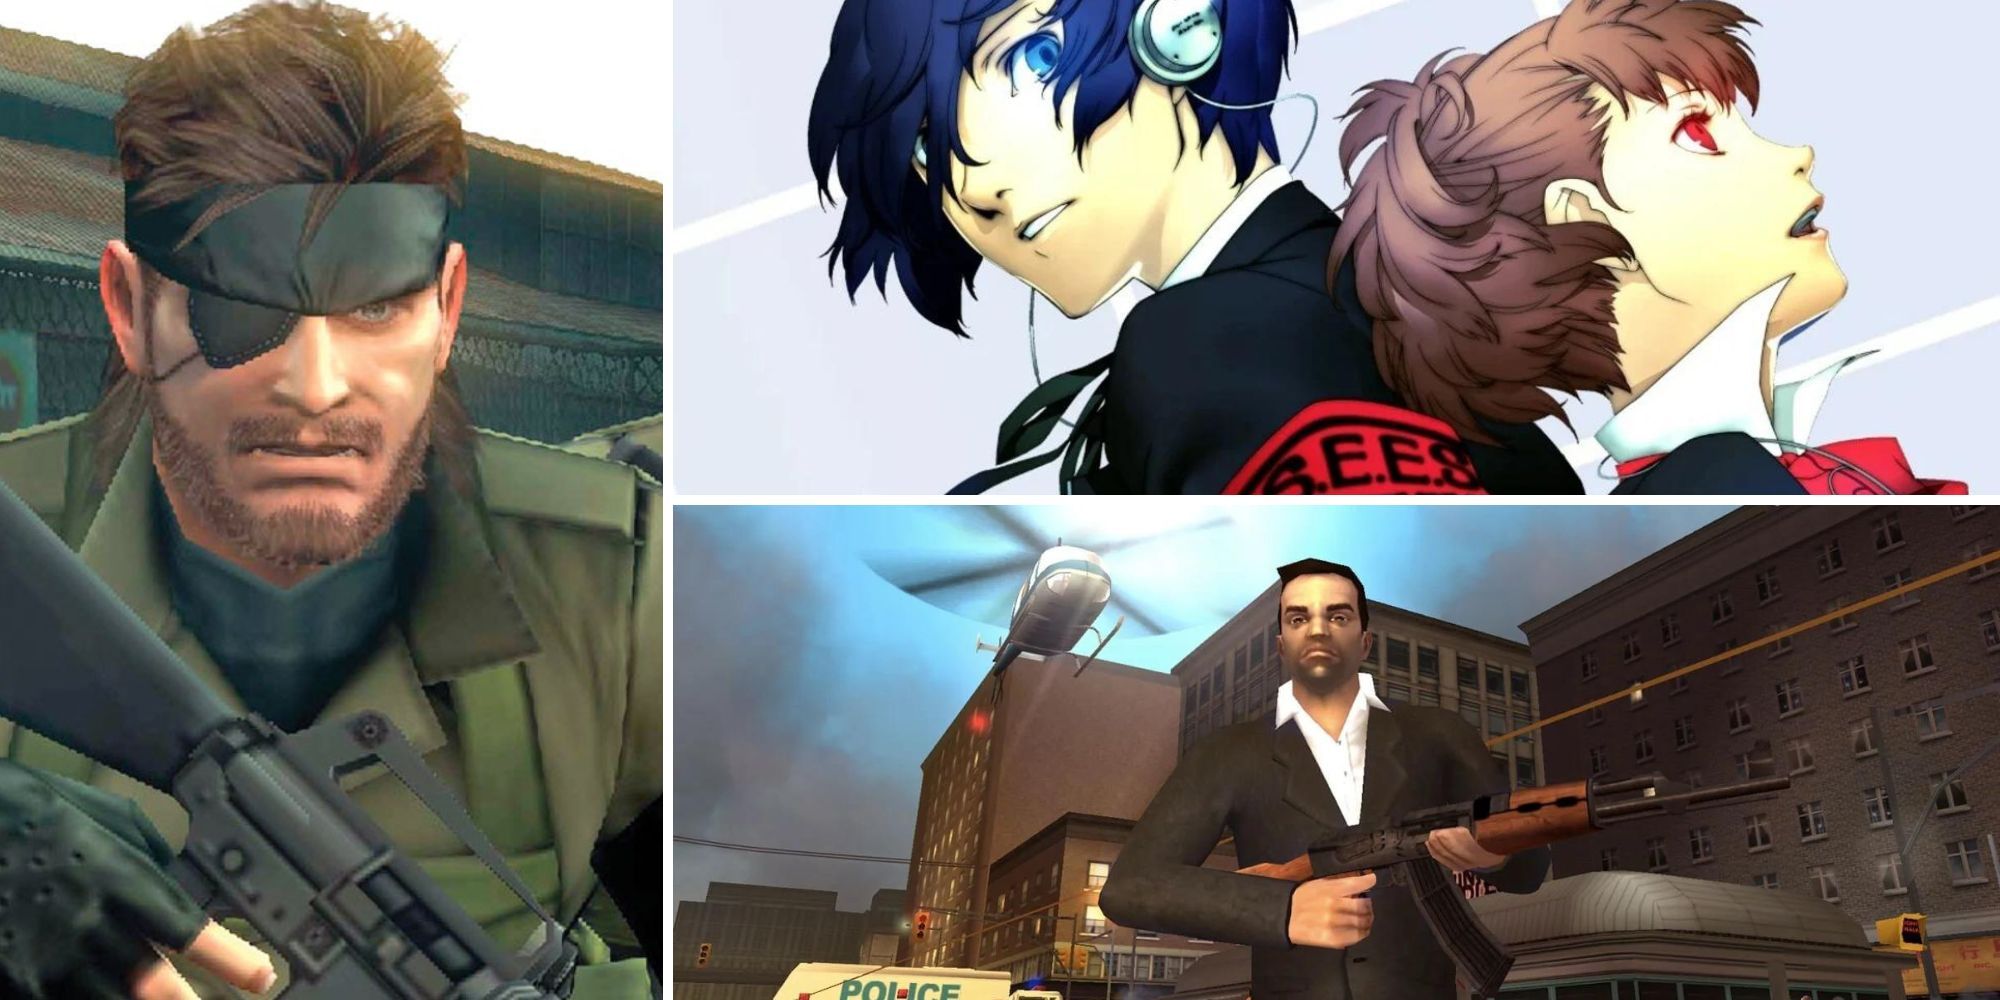 Collage of the best PSP games (Metal Gear Solid: Peace Walker, Persona 3 Portable, Grand Theft Auto: Liberty Stories)